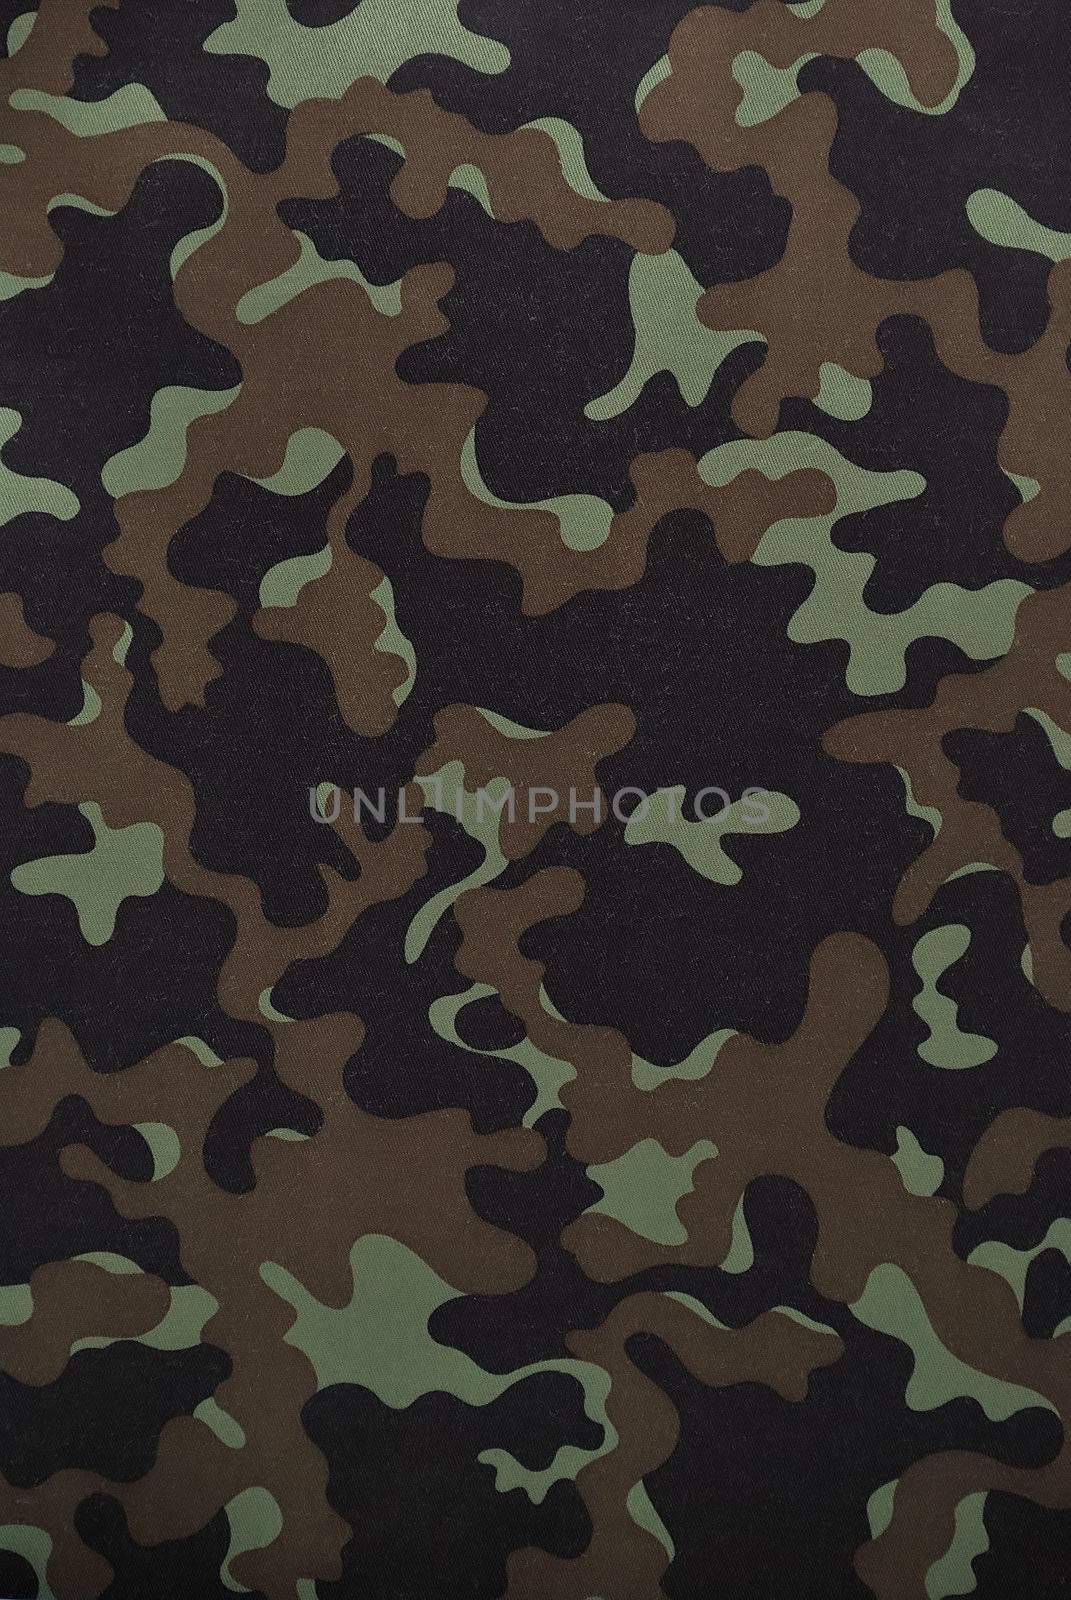 Camouflage fabric in a vertical orientation